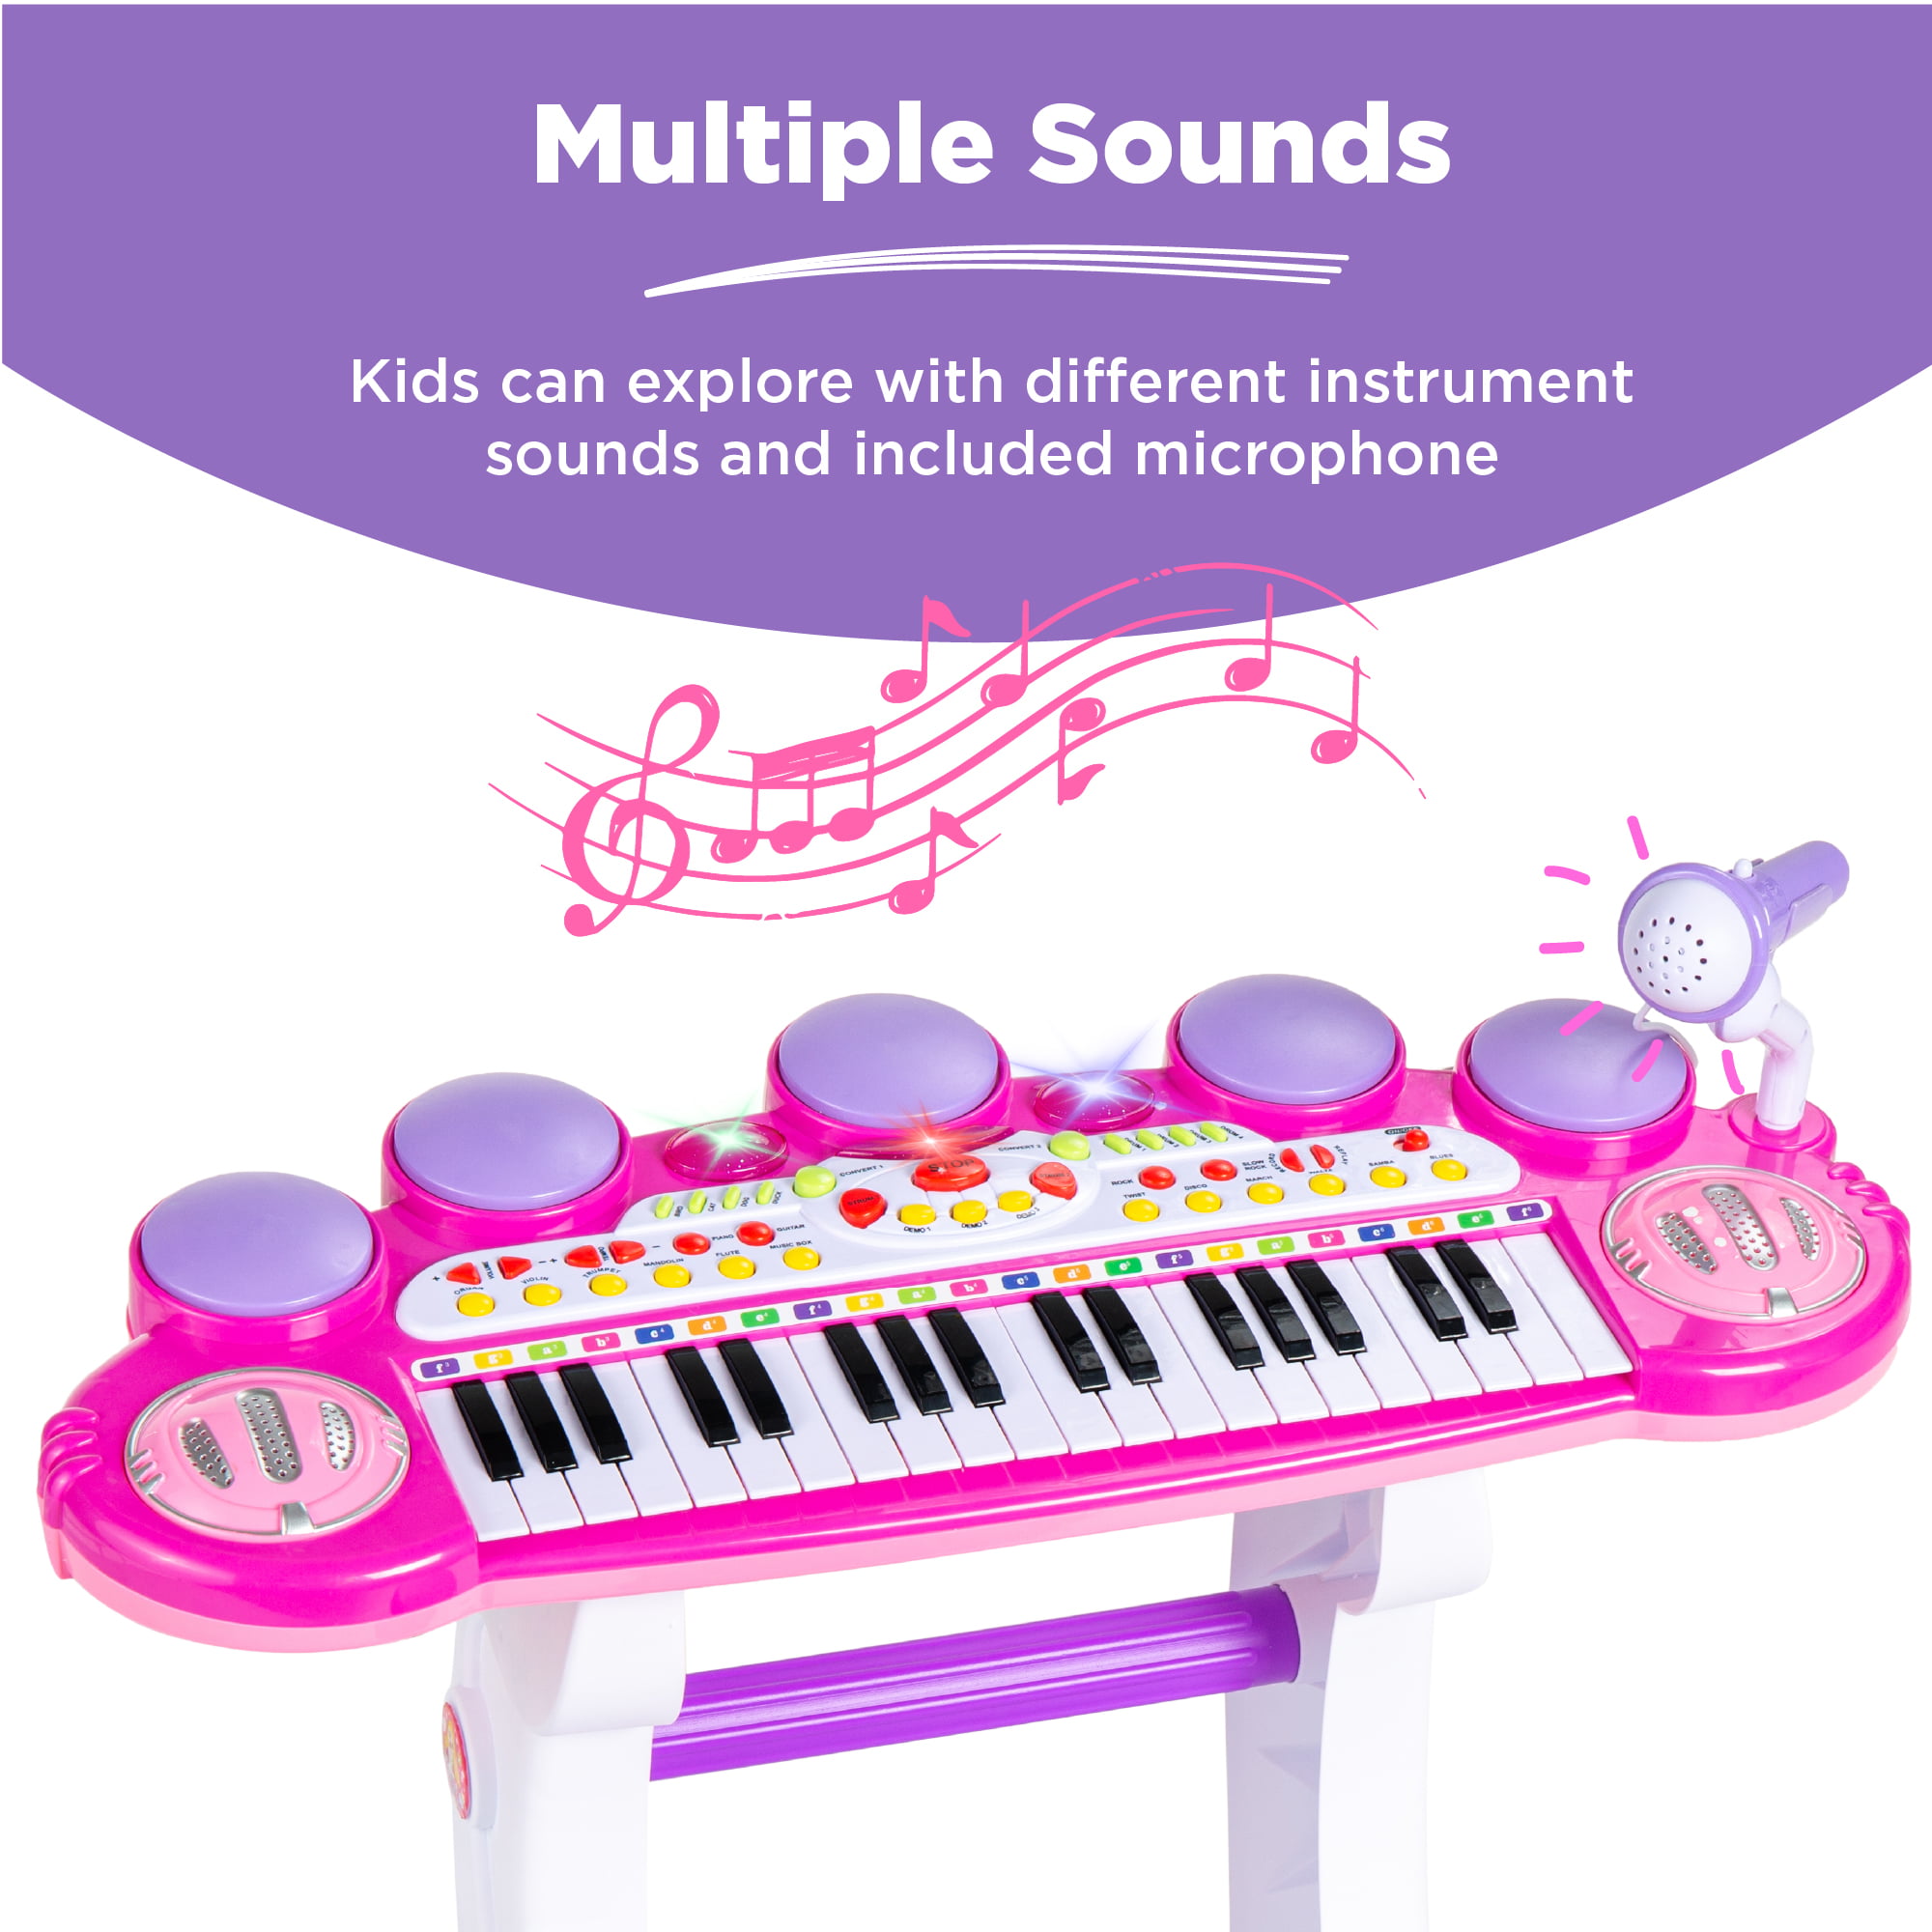 Best Choice Products 37-Key Kids Electronic Piano Keyboard w/ Multiple Sounds, Lights Microphone, Stool - Pink - image 5 of 7